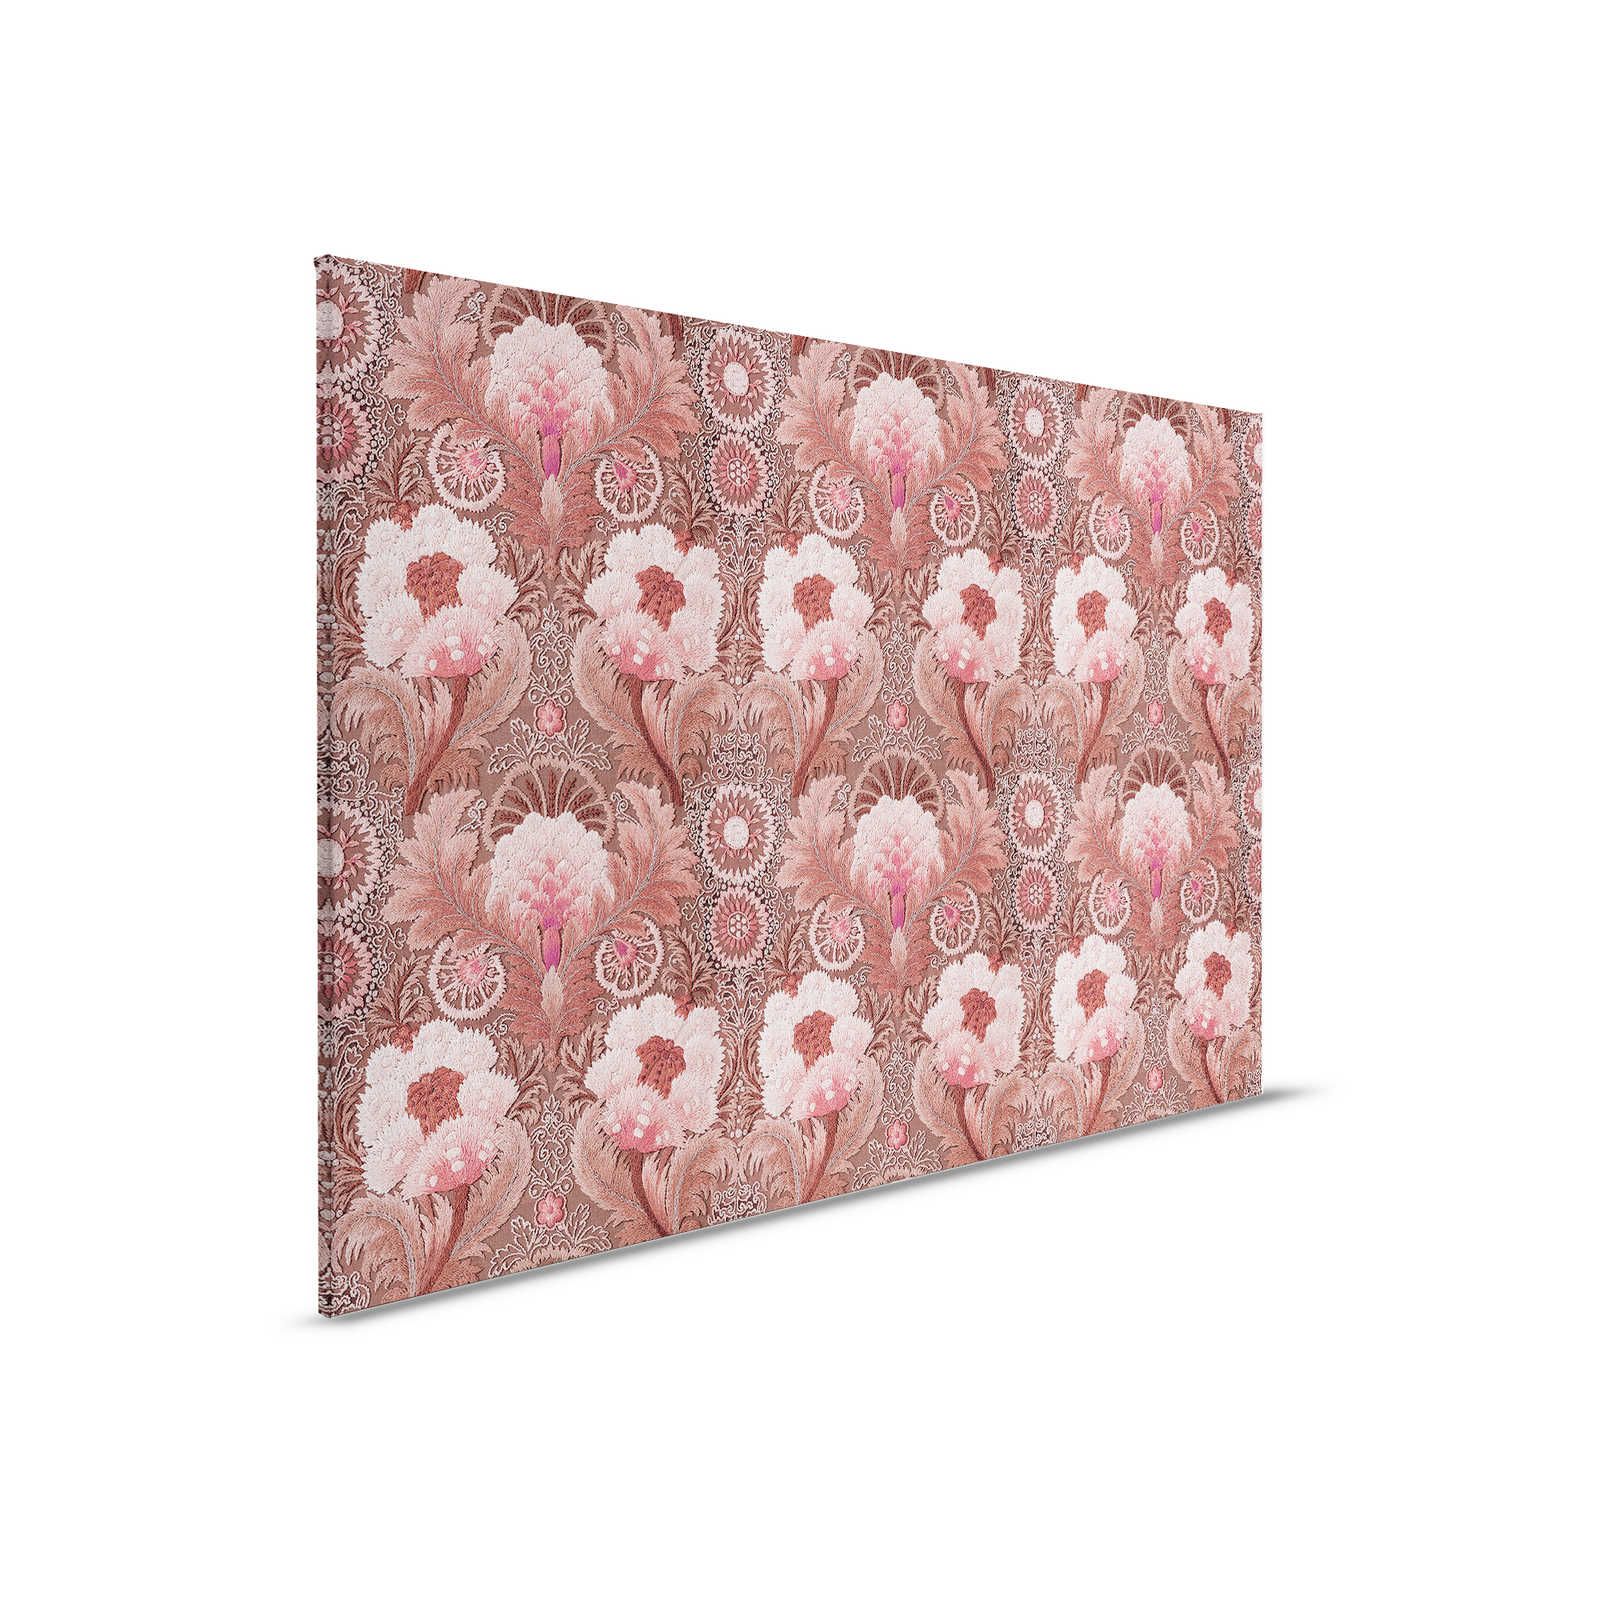         Chateau 2 - Pink Opulent Style Canvas Painting Ornaments - 0.90 m x 0.60 m
    